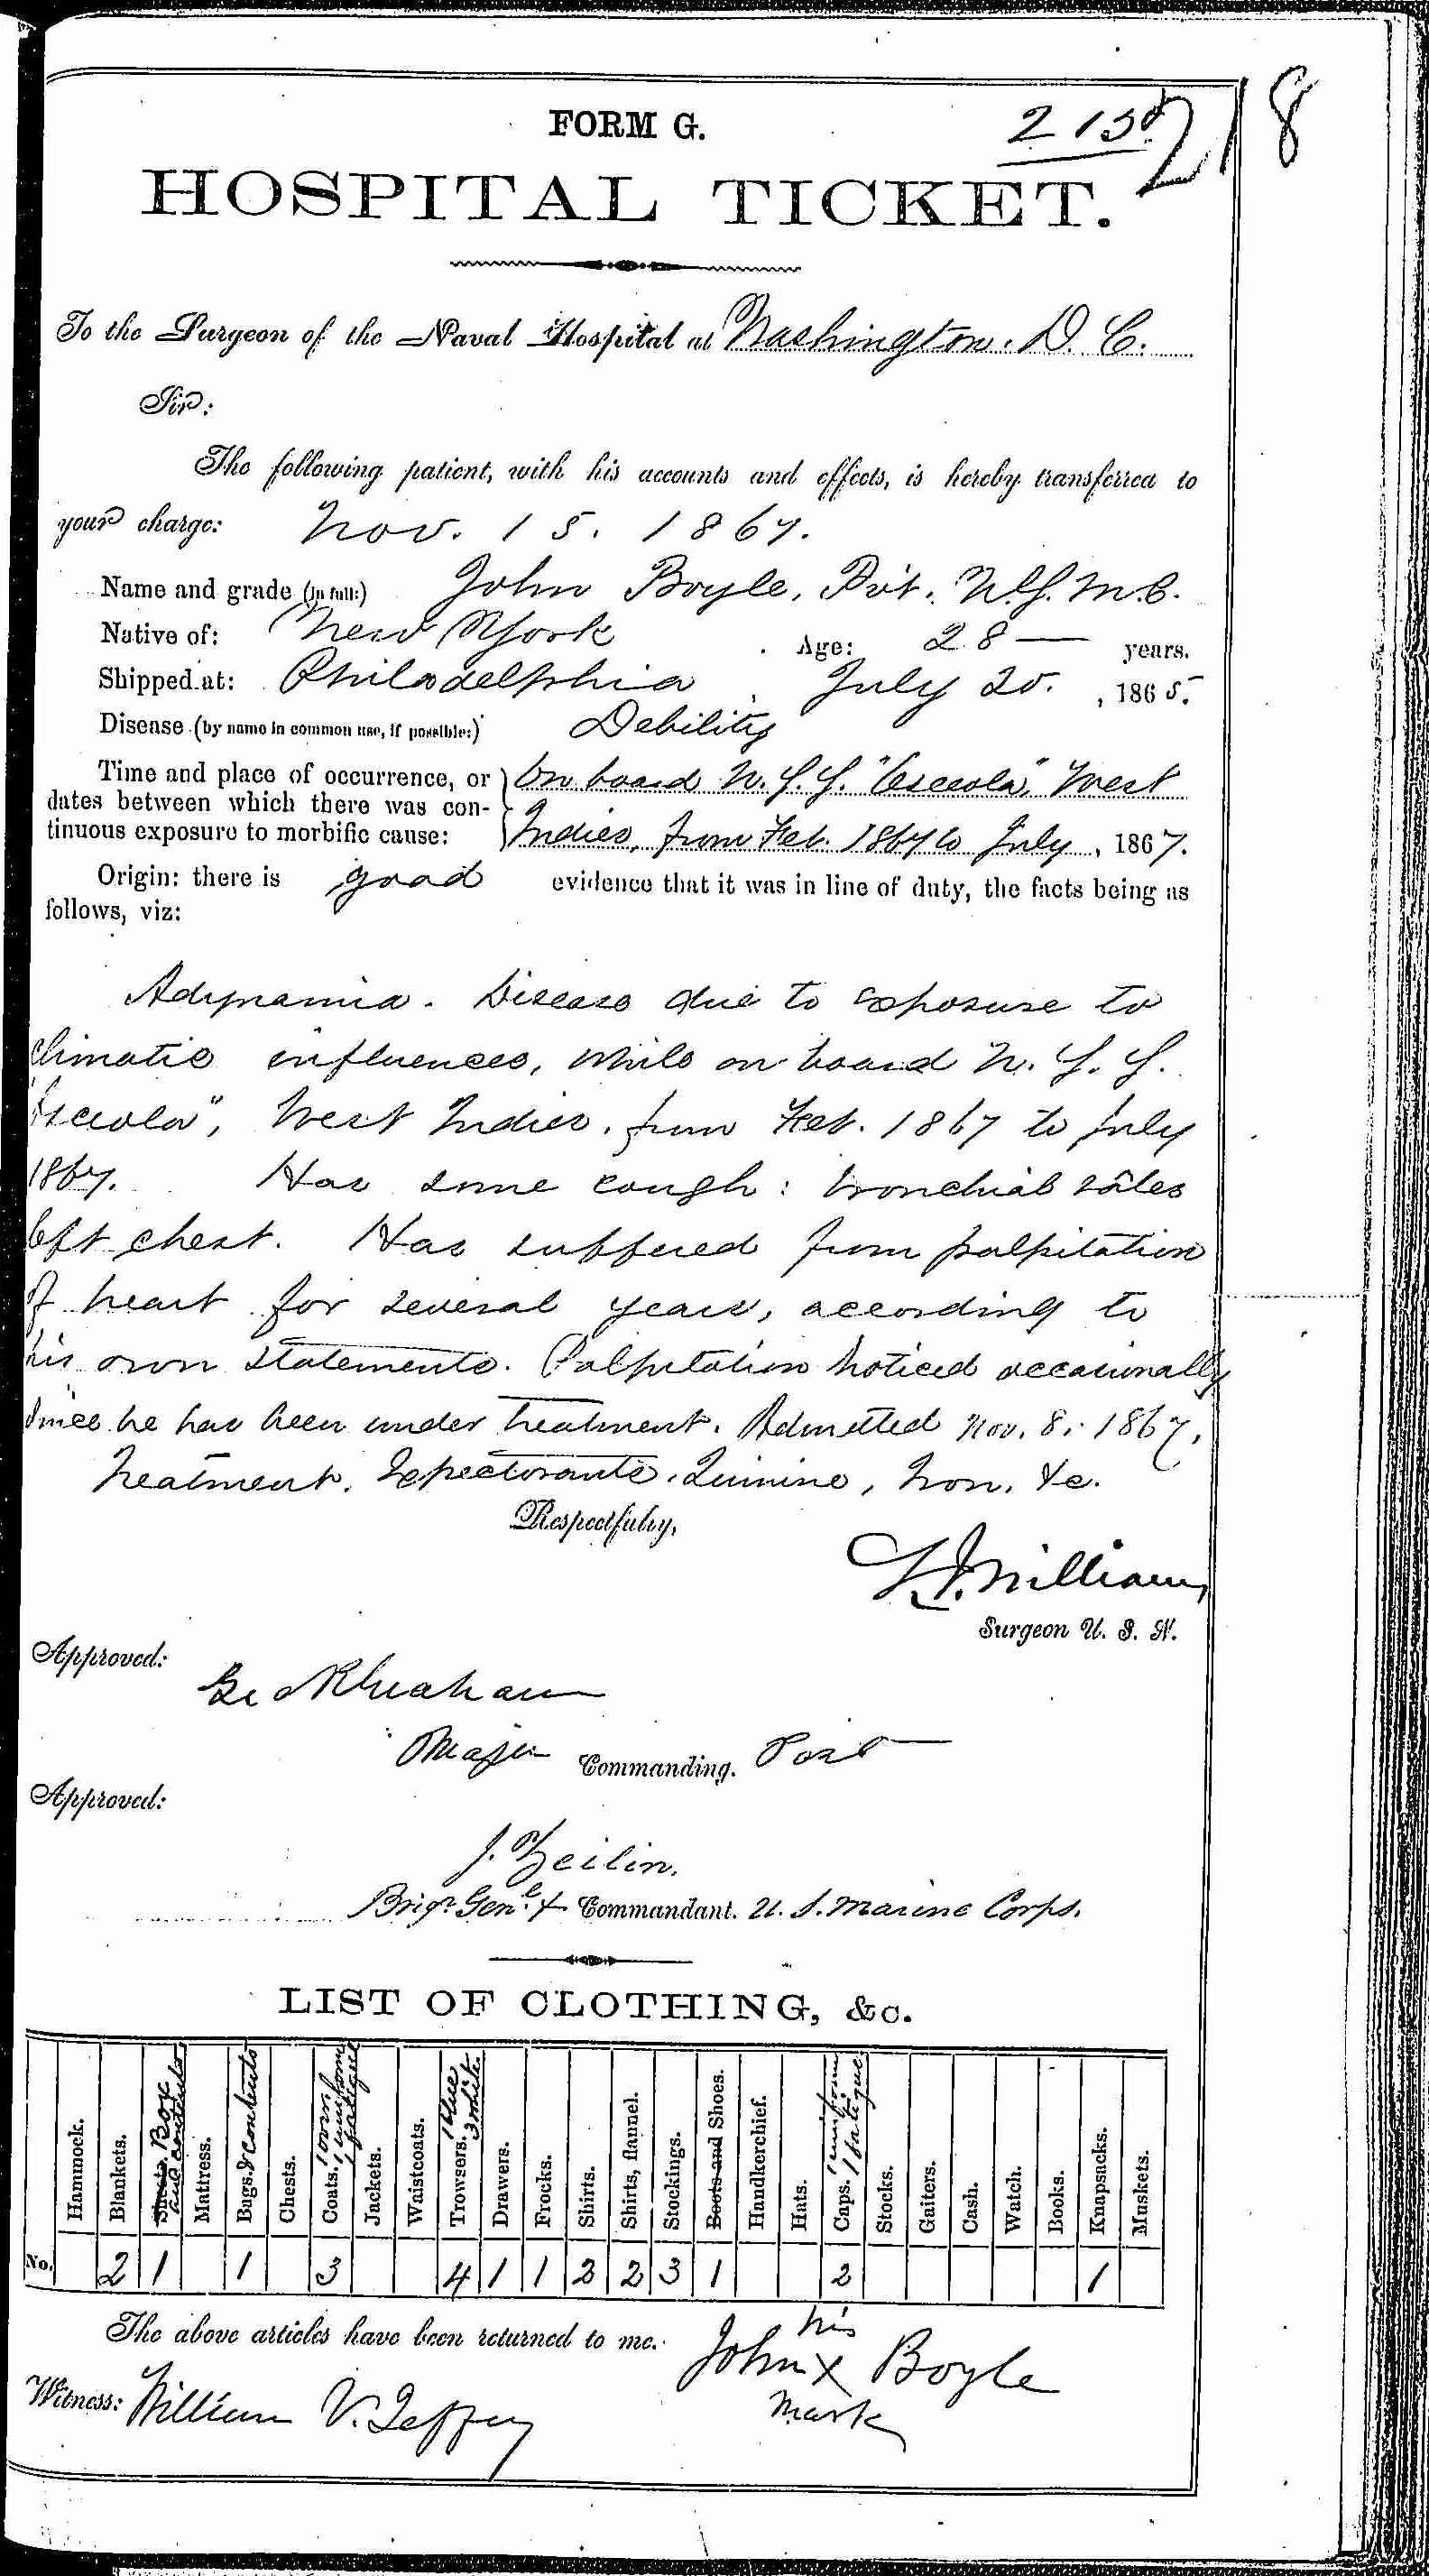 Entry for John Boyle (page 1 of 2) in the log Hospital Tickets and Case Papers - Naval Hospital - Washington, D.C. - 1866-68